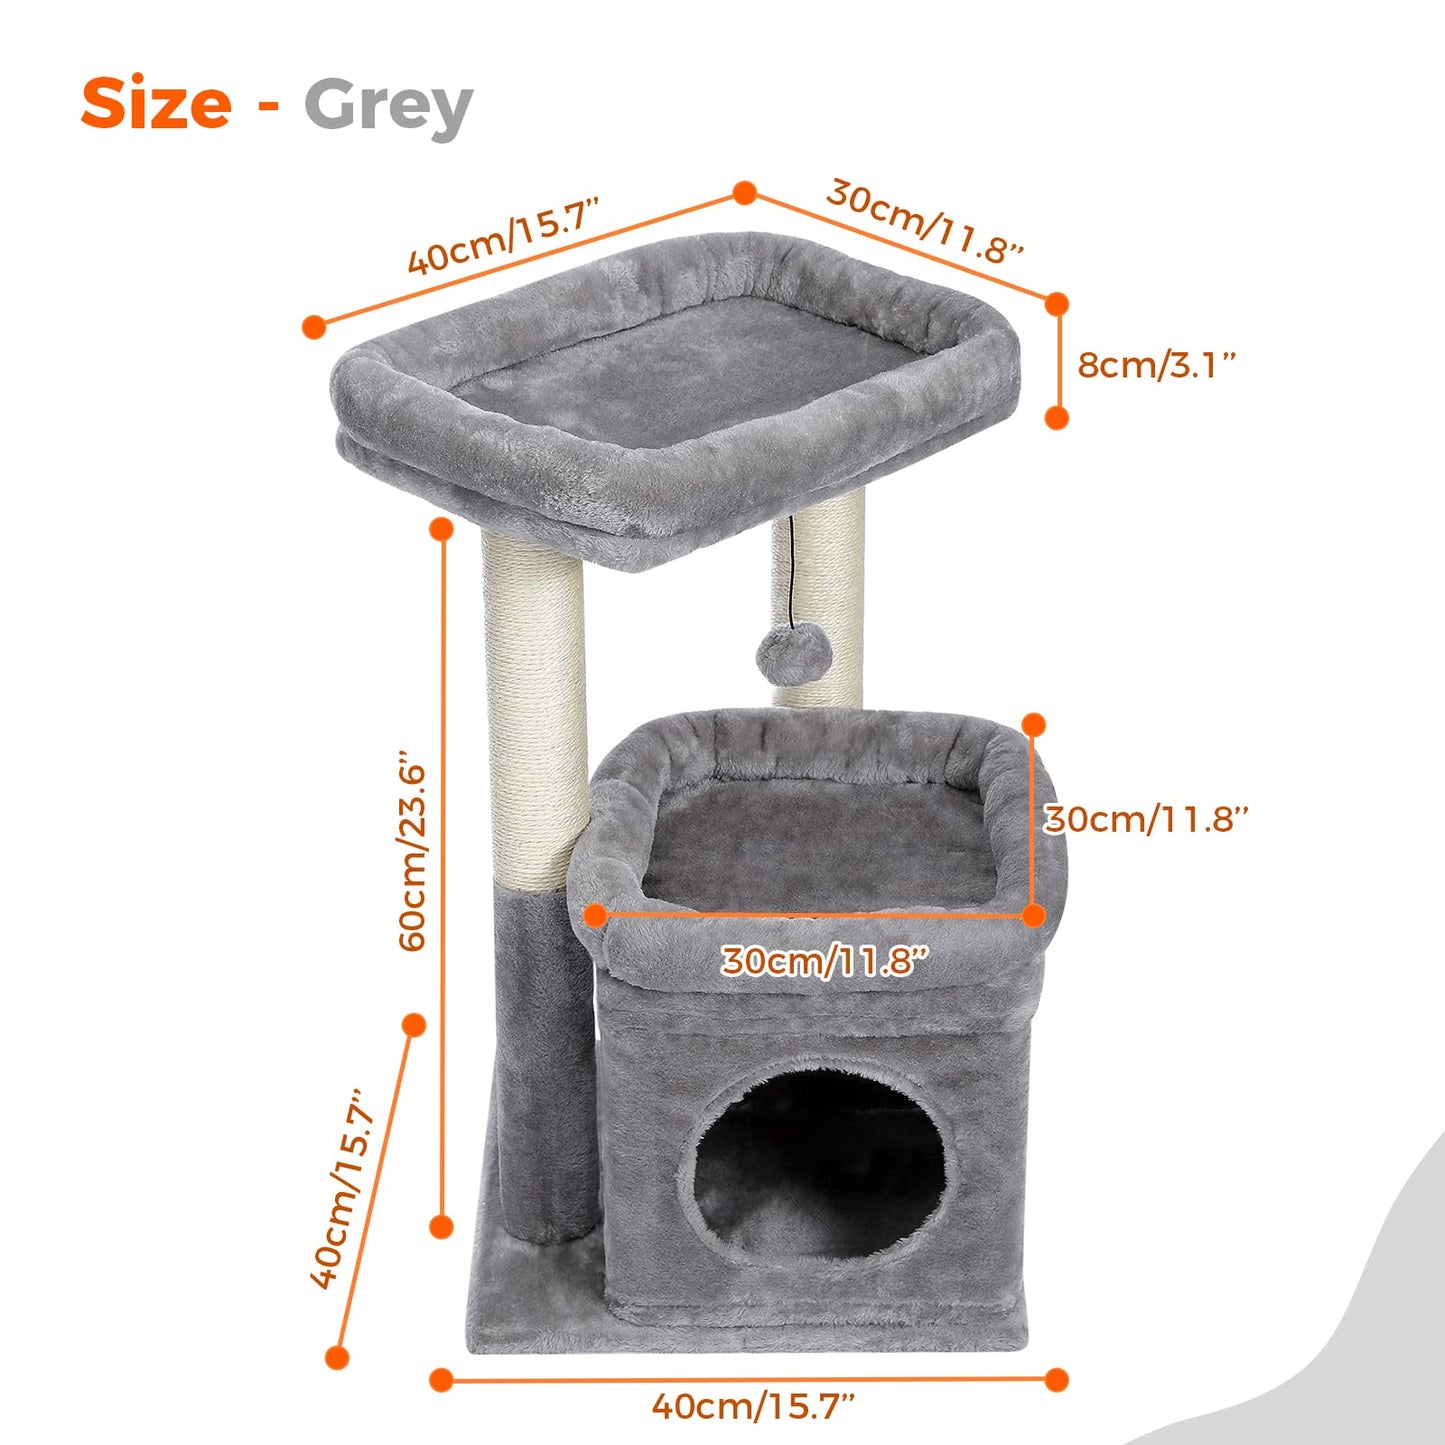 PEQULTI Cat Tree Tower for Indoor Cats with Private Cozy Cat Condo, Natural Sisal Scratching Posts and Plush Pom-pom for Small Cats